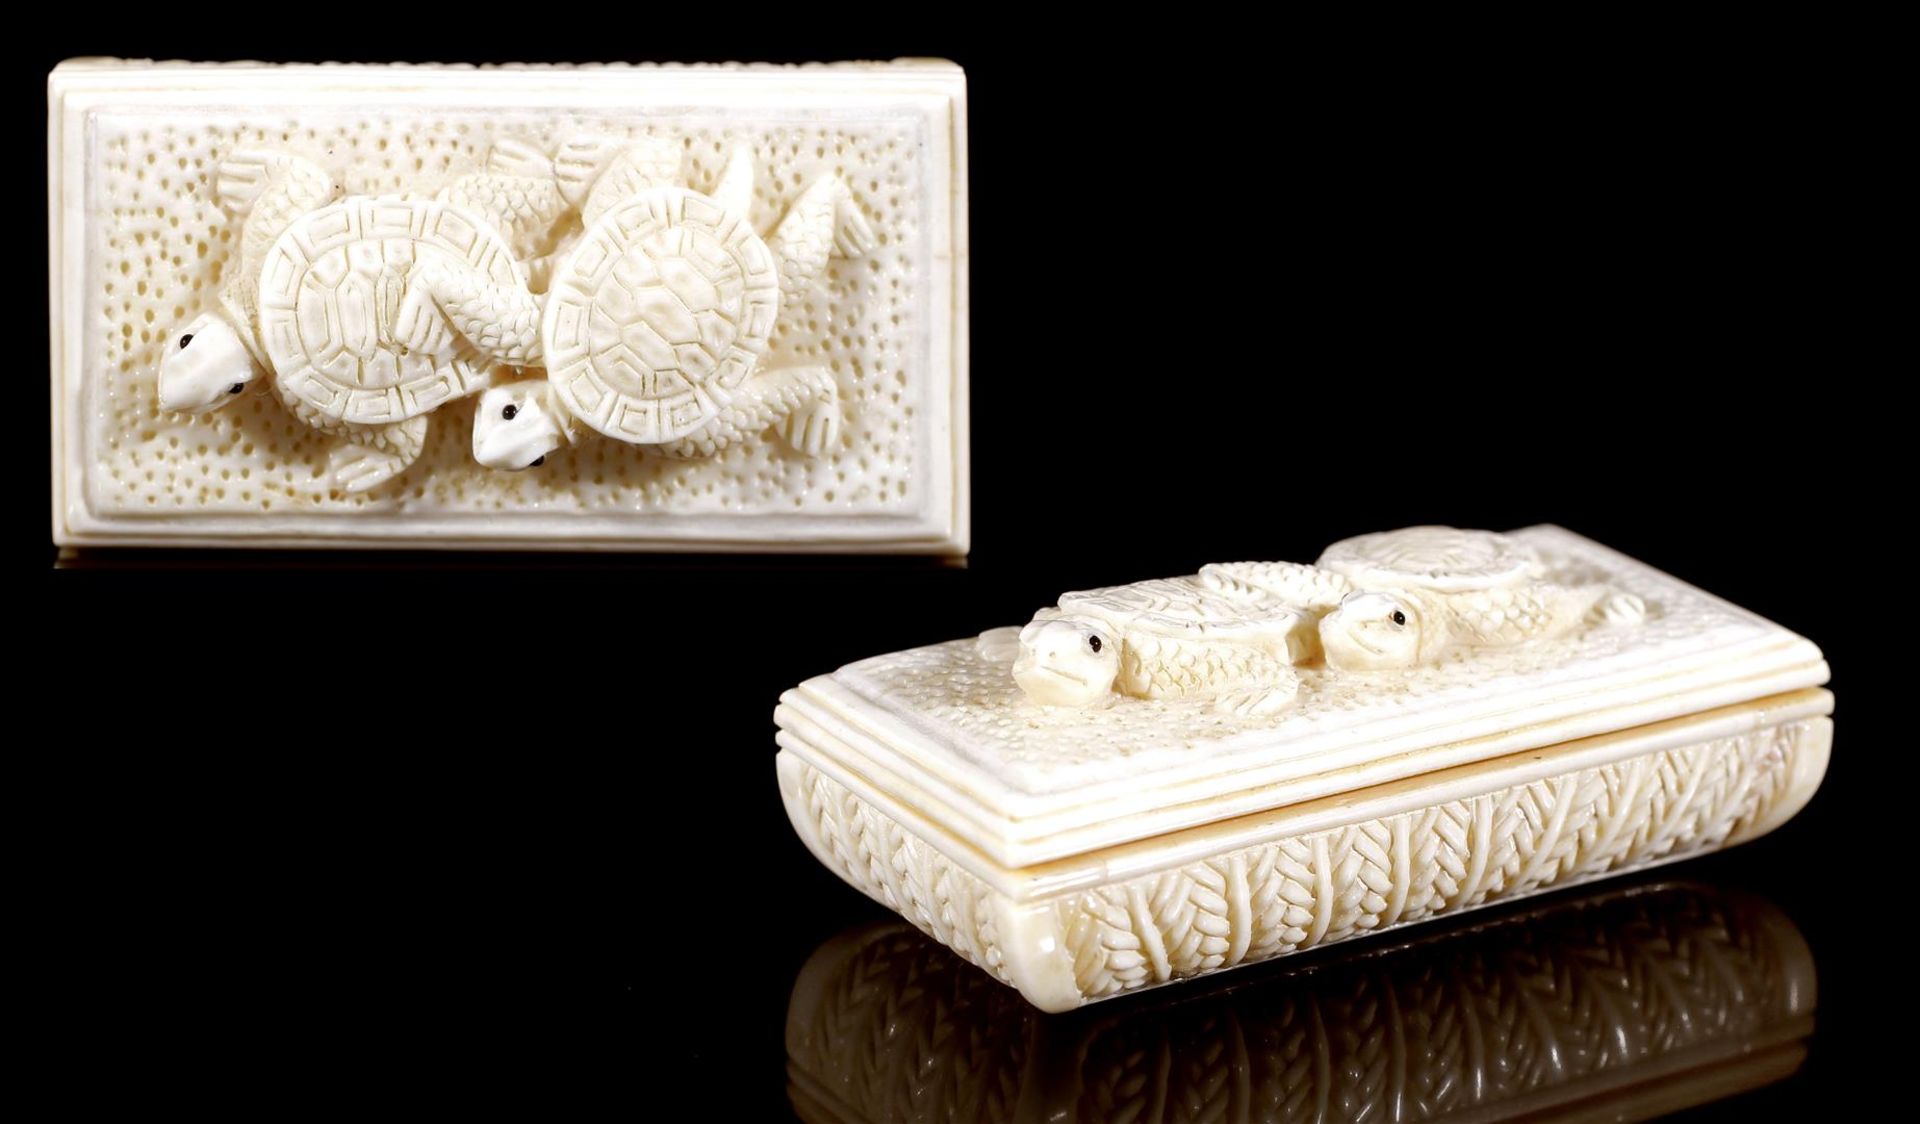 Richly carved ivory box with 2 turtles on top, China approx. 1890, 7 x 3.5 x 2.5 cm, 56.5 grams.